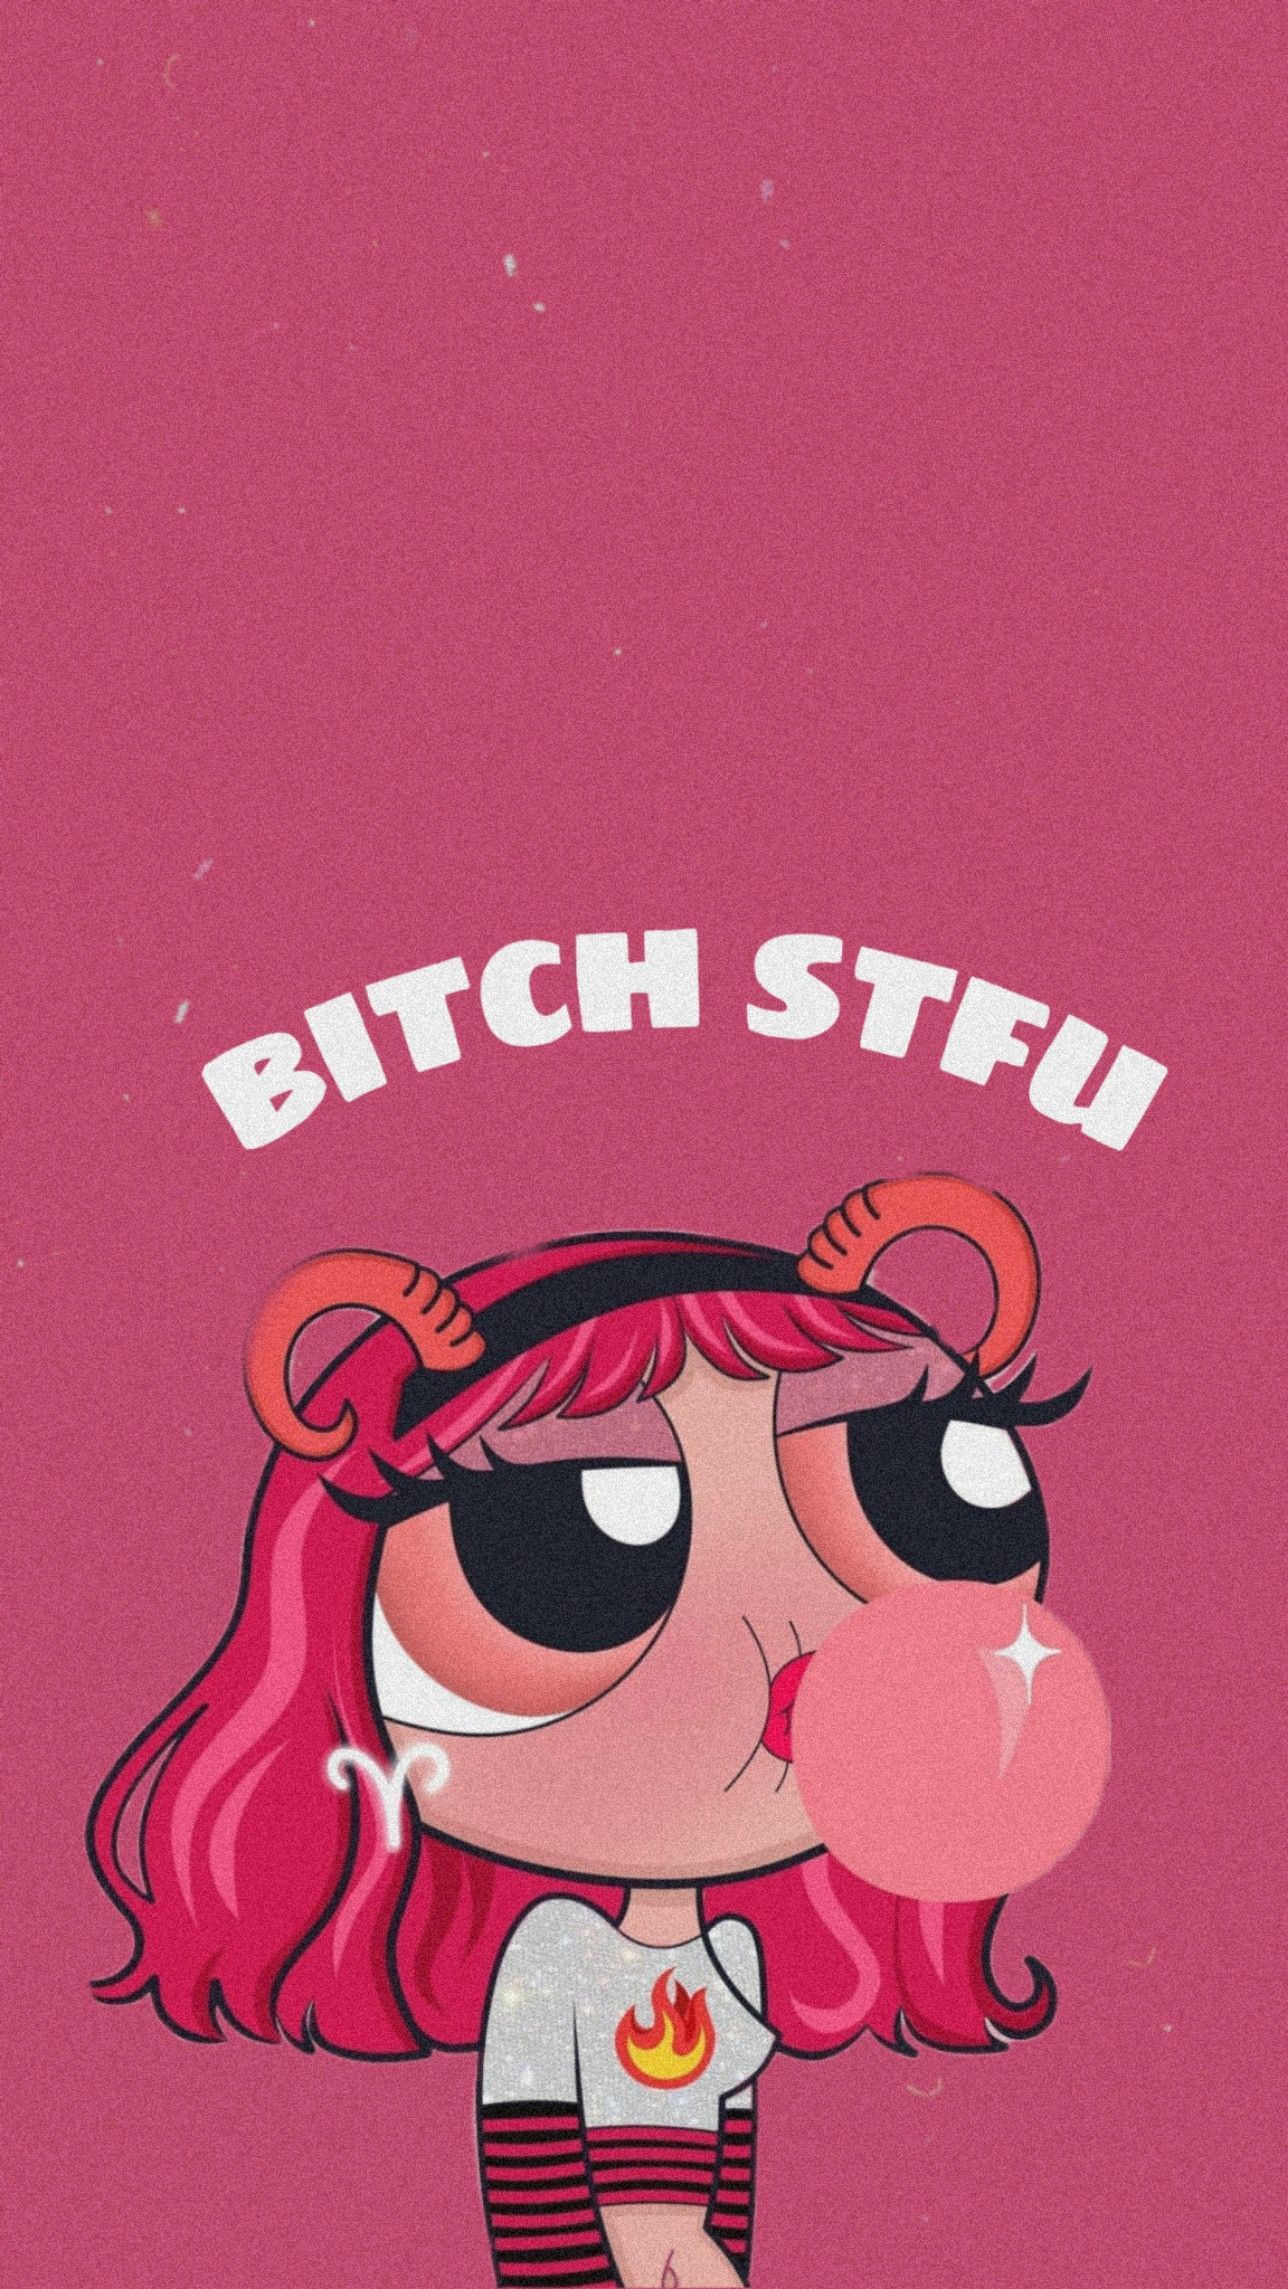 Cool For Girls Wallpaper Free Full HD Download, use for mobile and desktop. Discover m. Powerpuff girls wallpaper, Girl iphone wallpaper, Badass wallpaper iphone